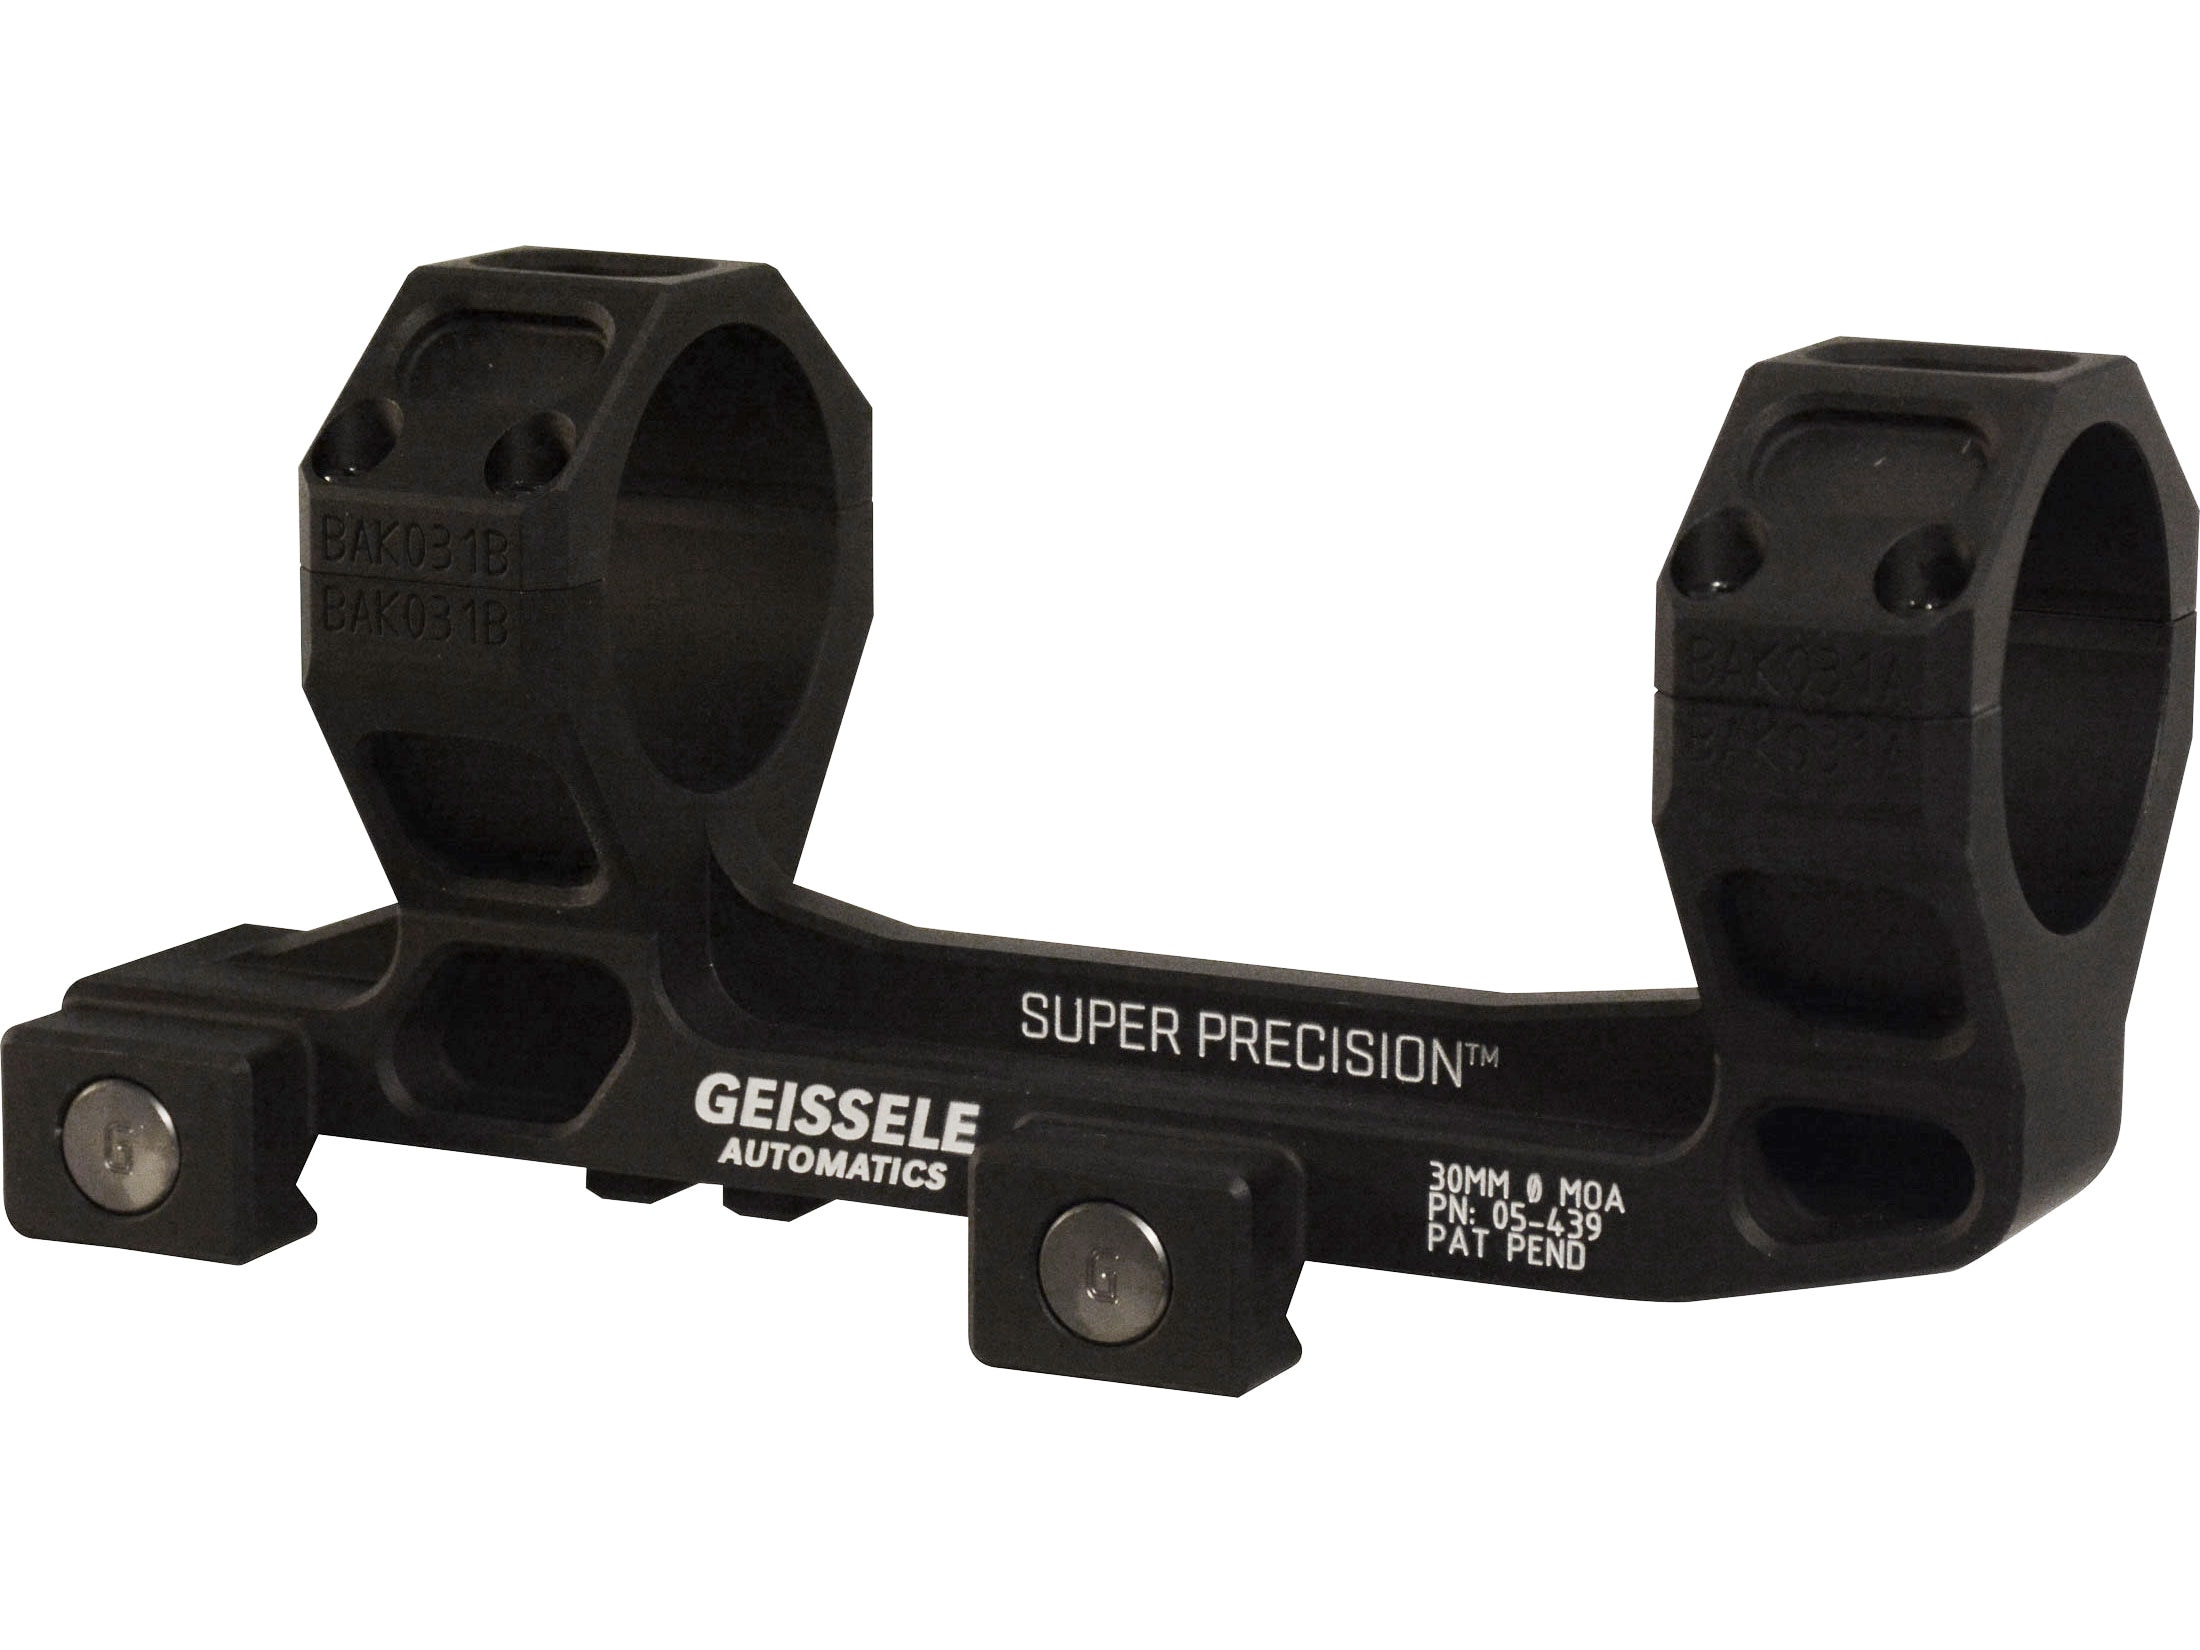 Geissele Super Precision Cantilever Scope Mount with Integral Rings 7075-T6 Aluminum For Sale